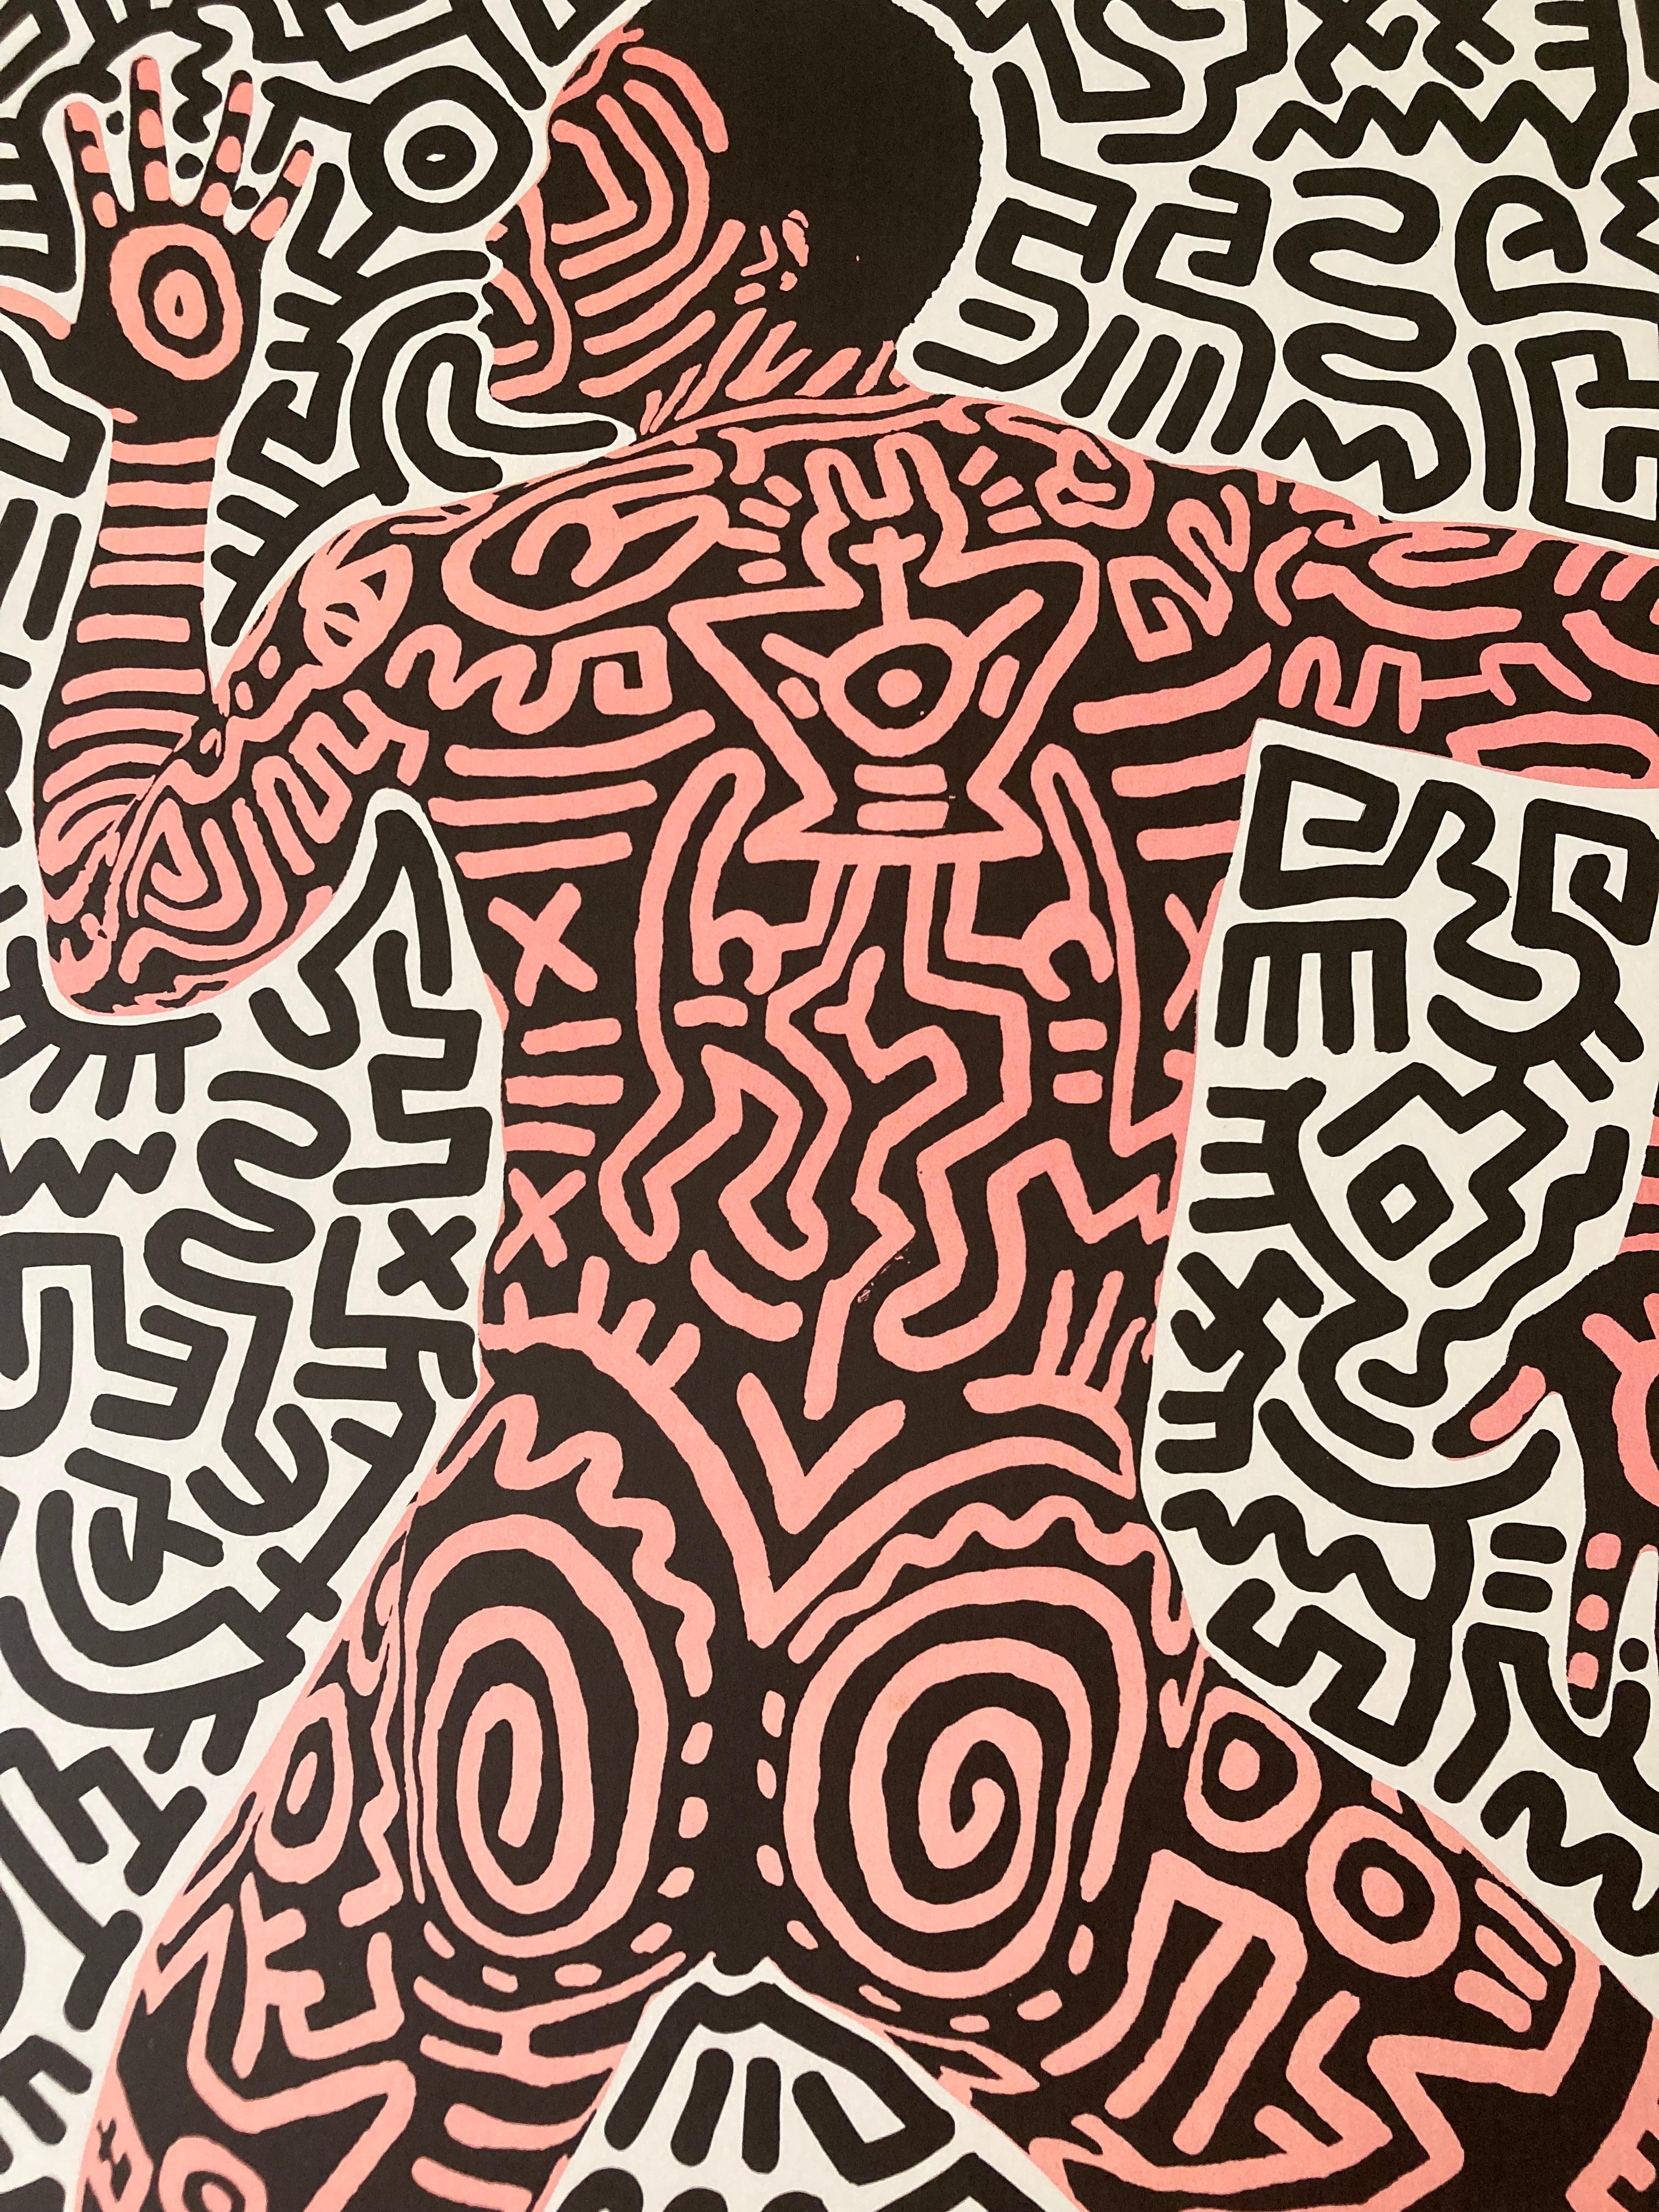 Keith Haring Artist Signed Exhibition Poster 'Into 84' for Tony Shafrazi Gallery For Sale 2